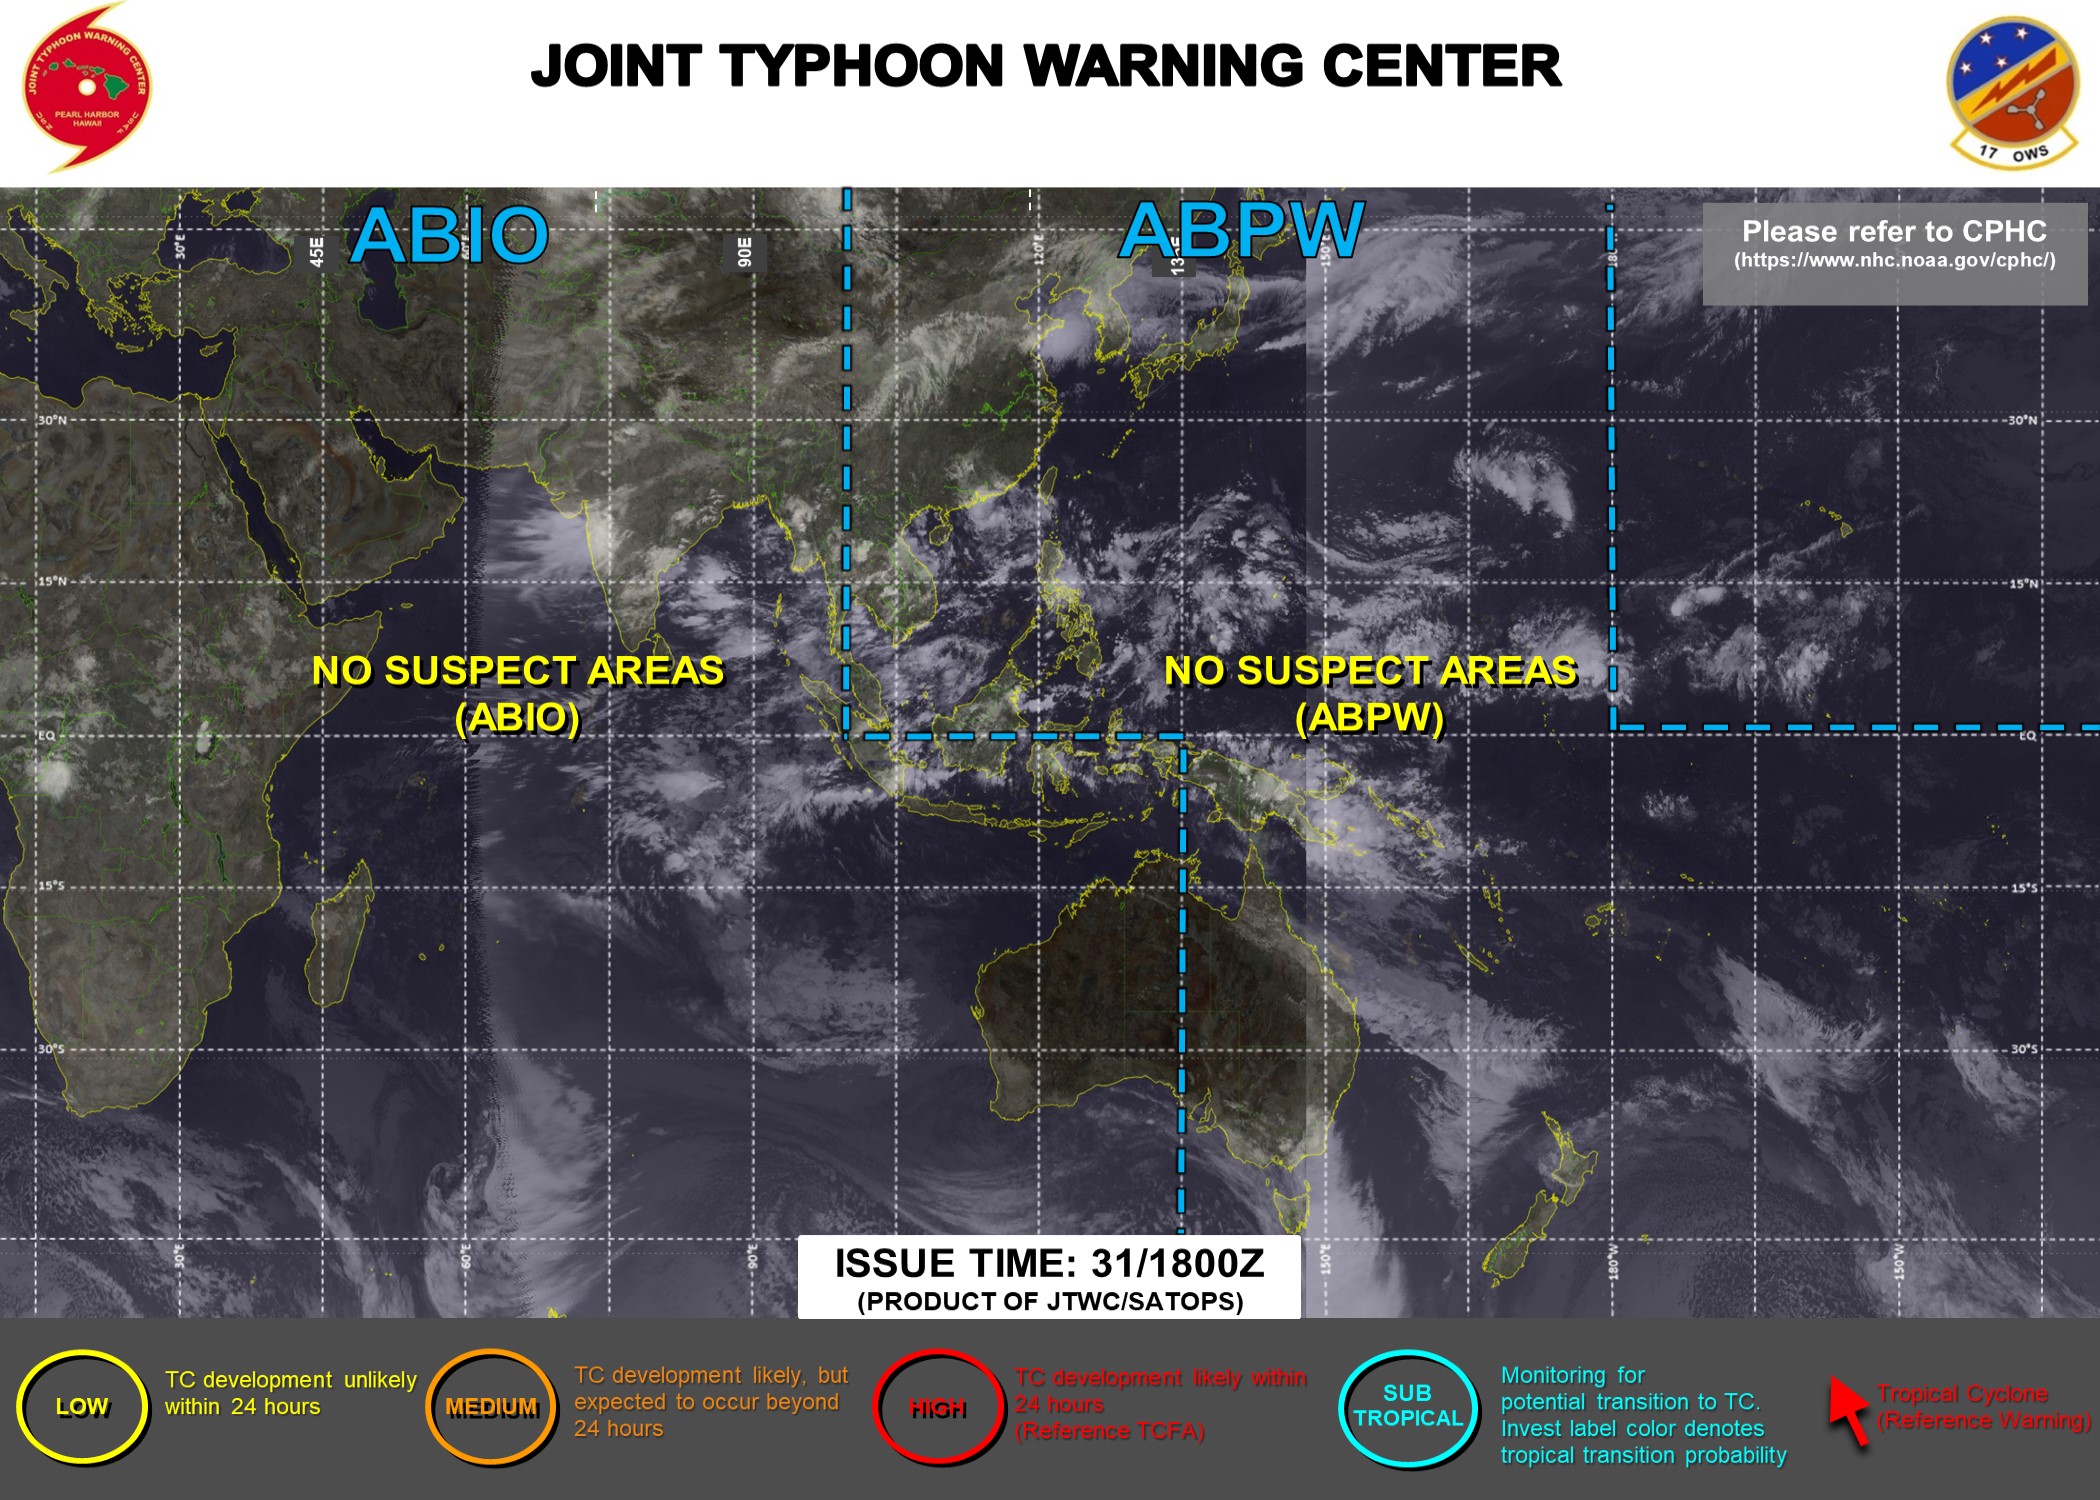 WESTERN PACIFIC, INDIAN OCEAN AND SOUTHERN HEMISPHERE: NO CURRENT SUSPECT AREAS.